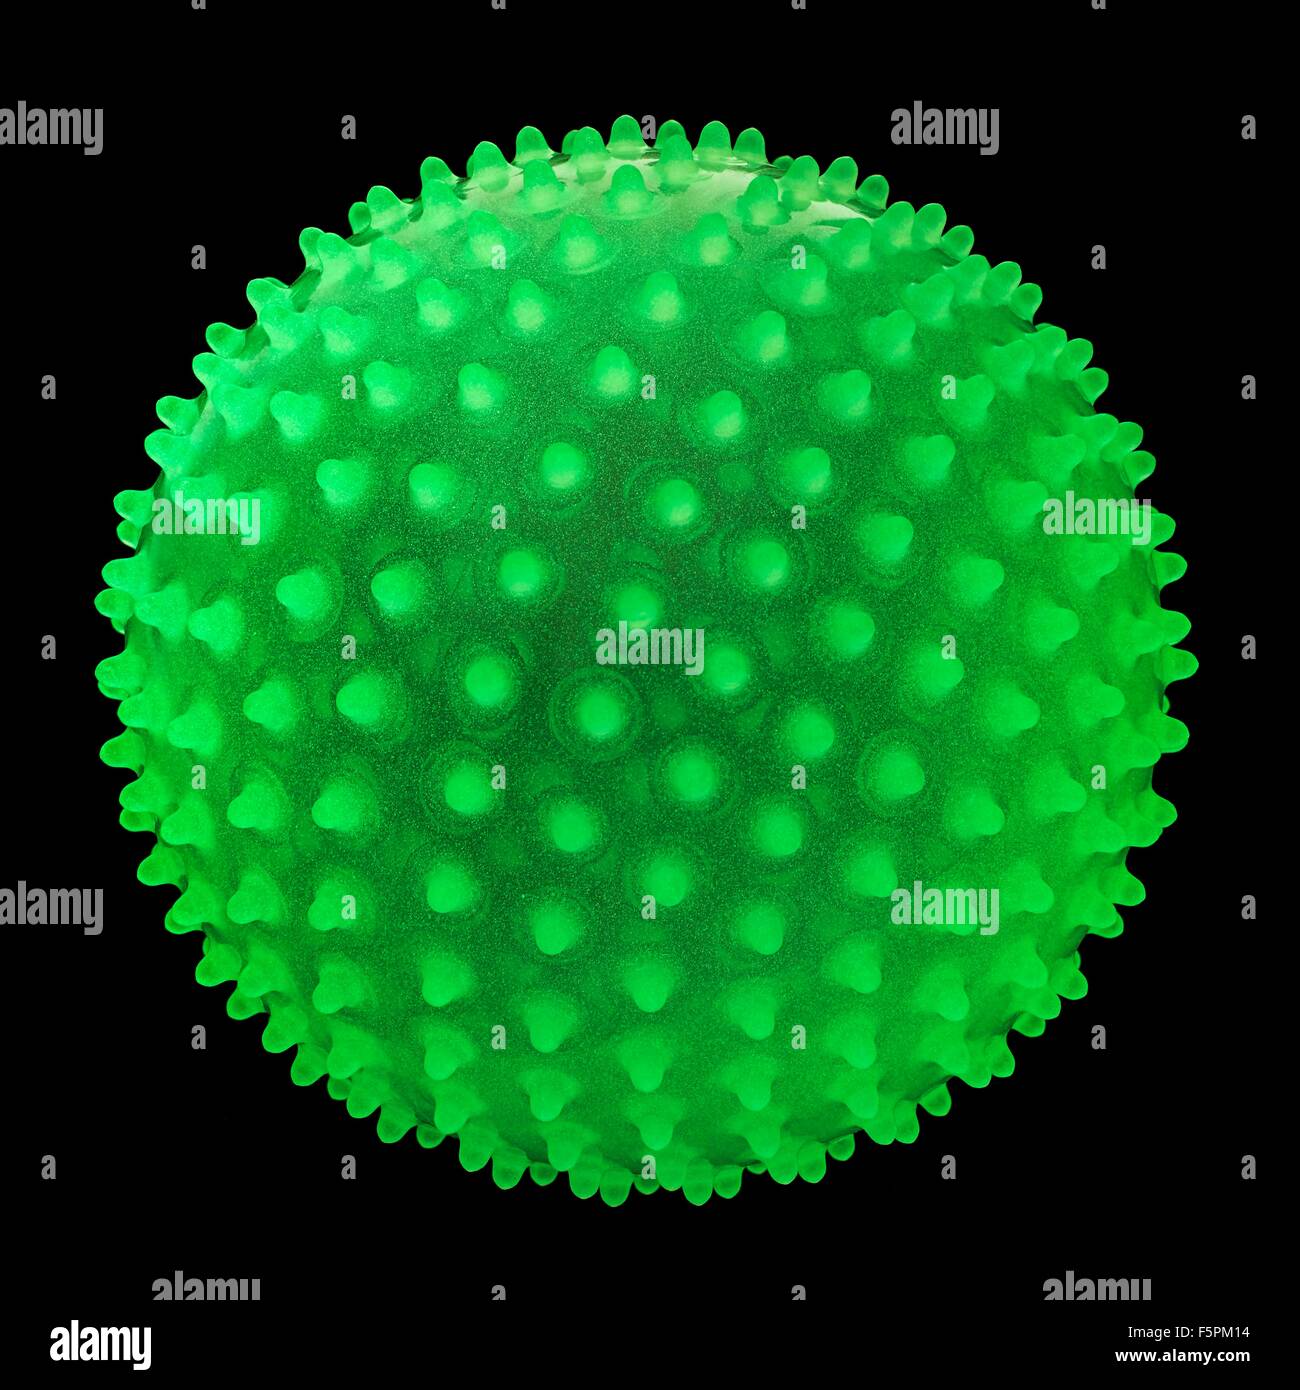 Green fluorescent spiky ball against a black background. Stock Photo